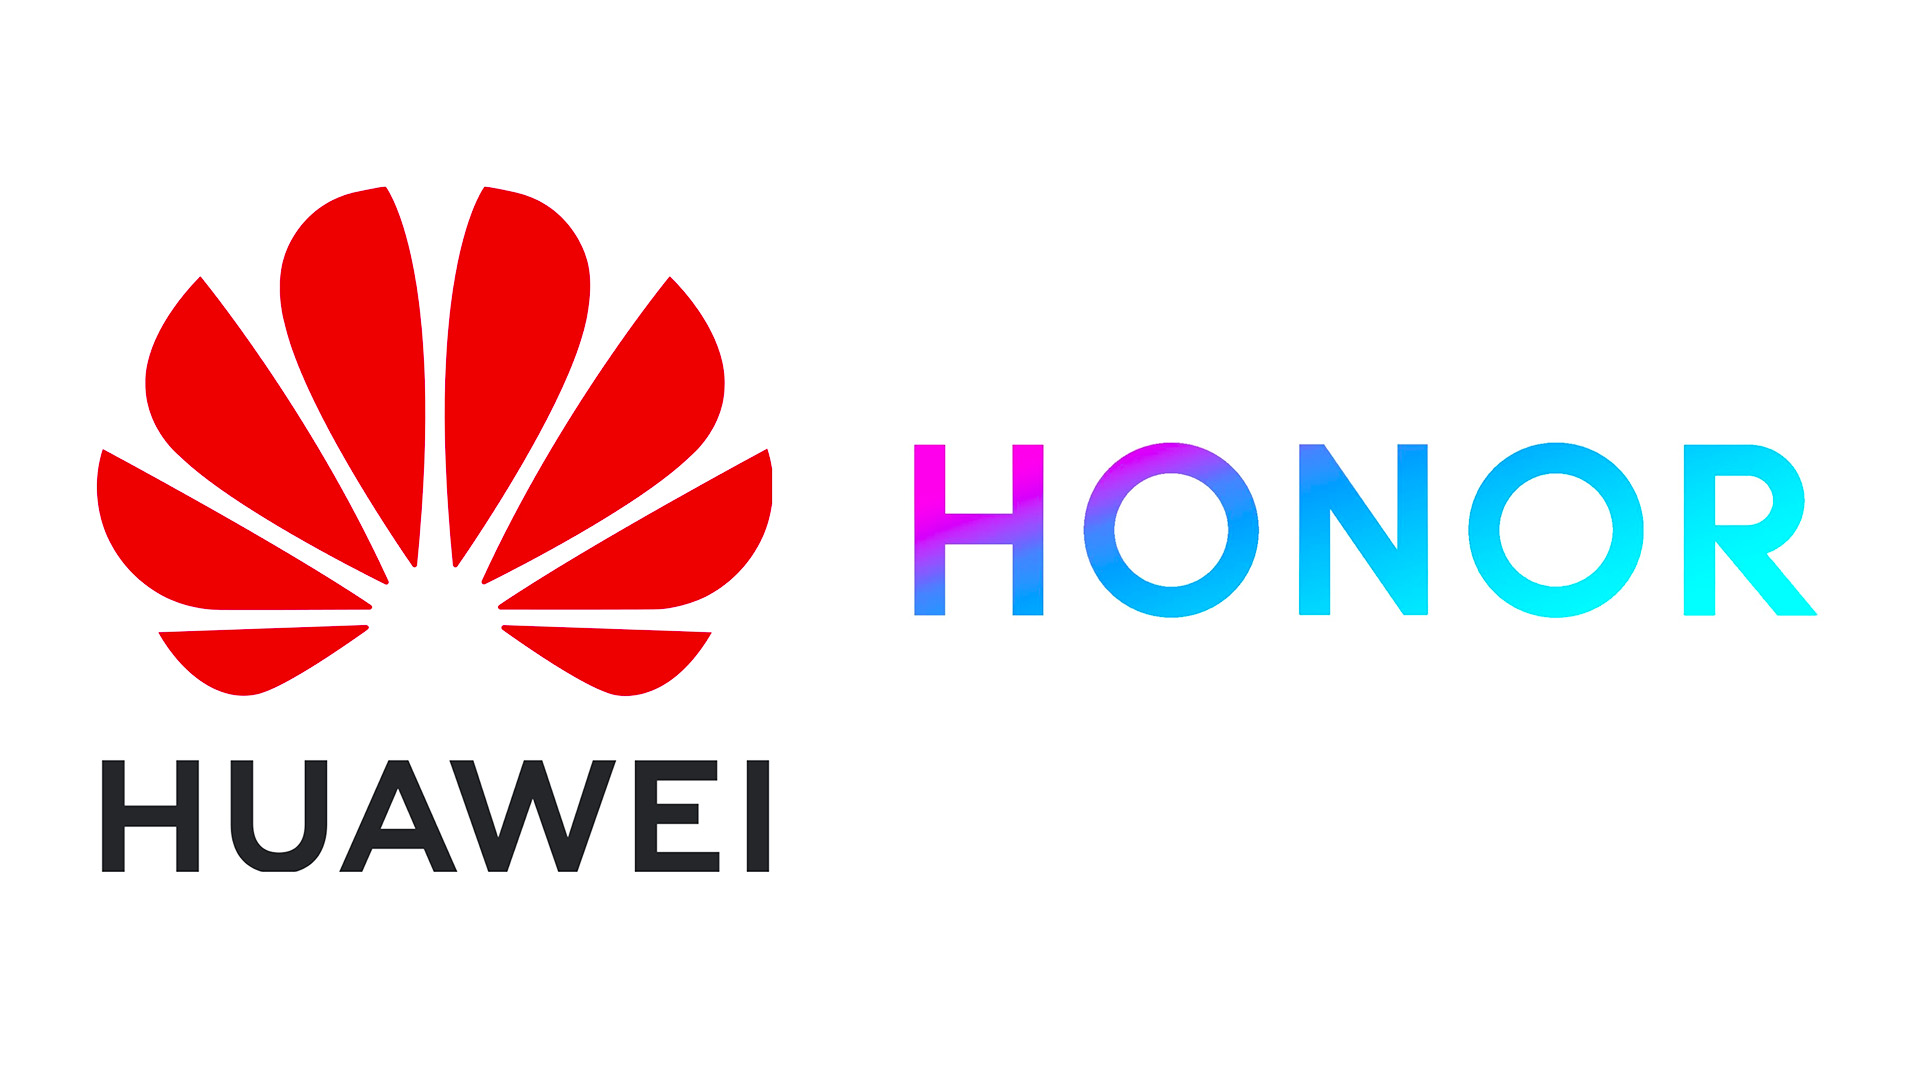 Huawei is no more on Honor's ownership business